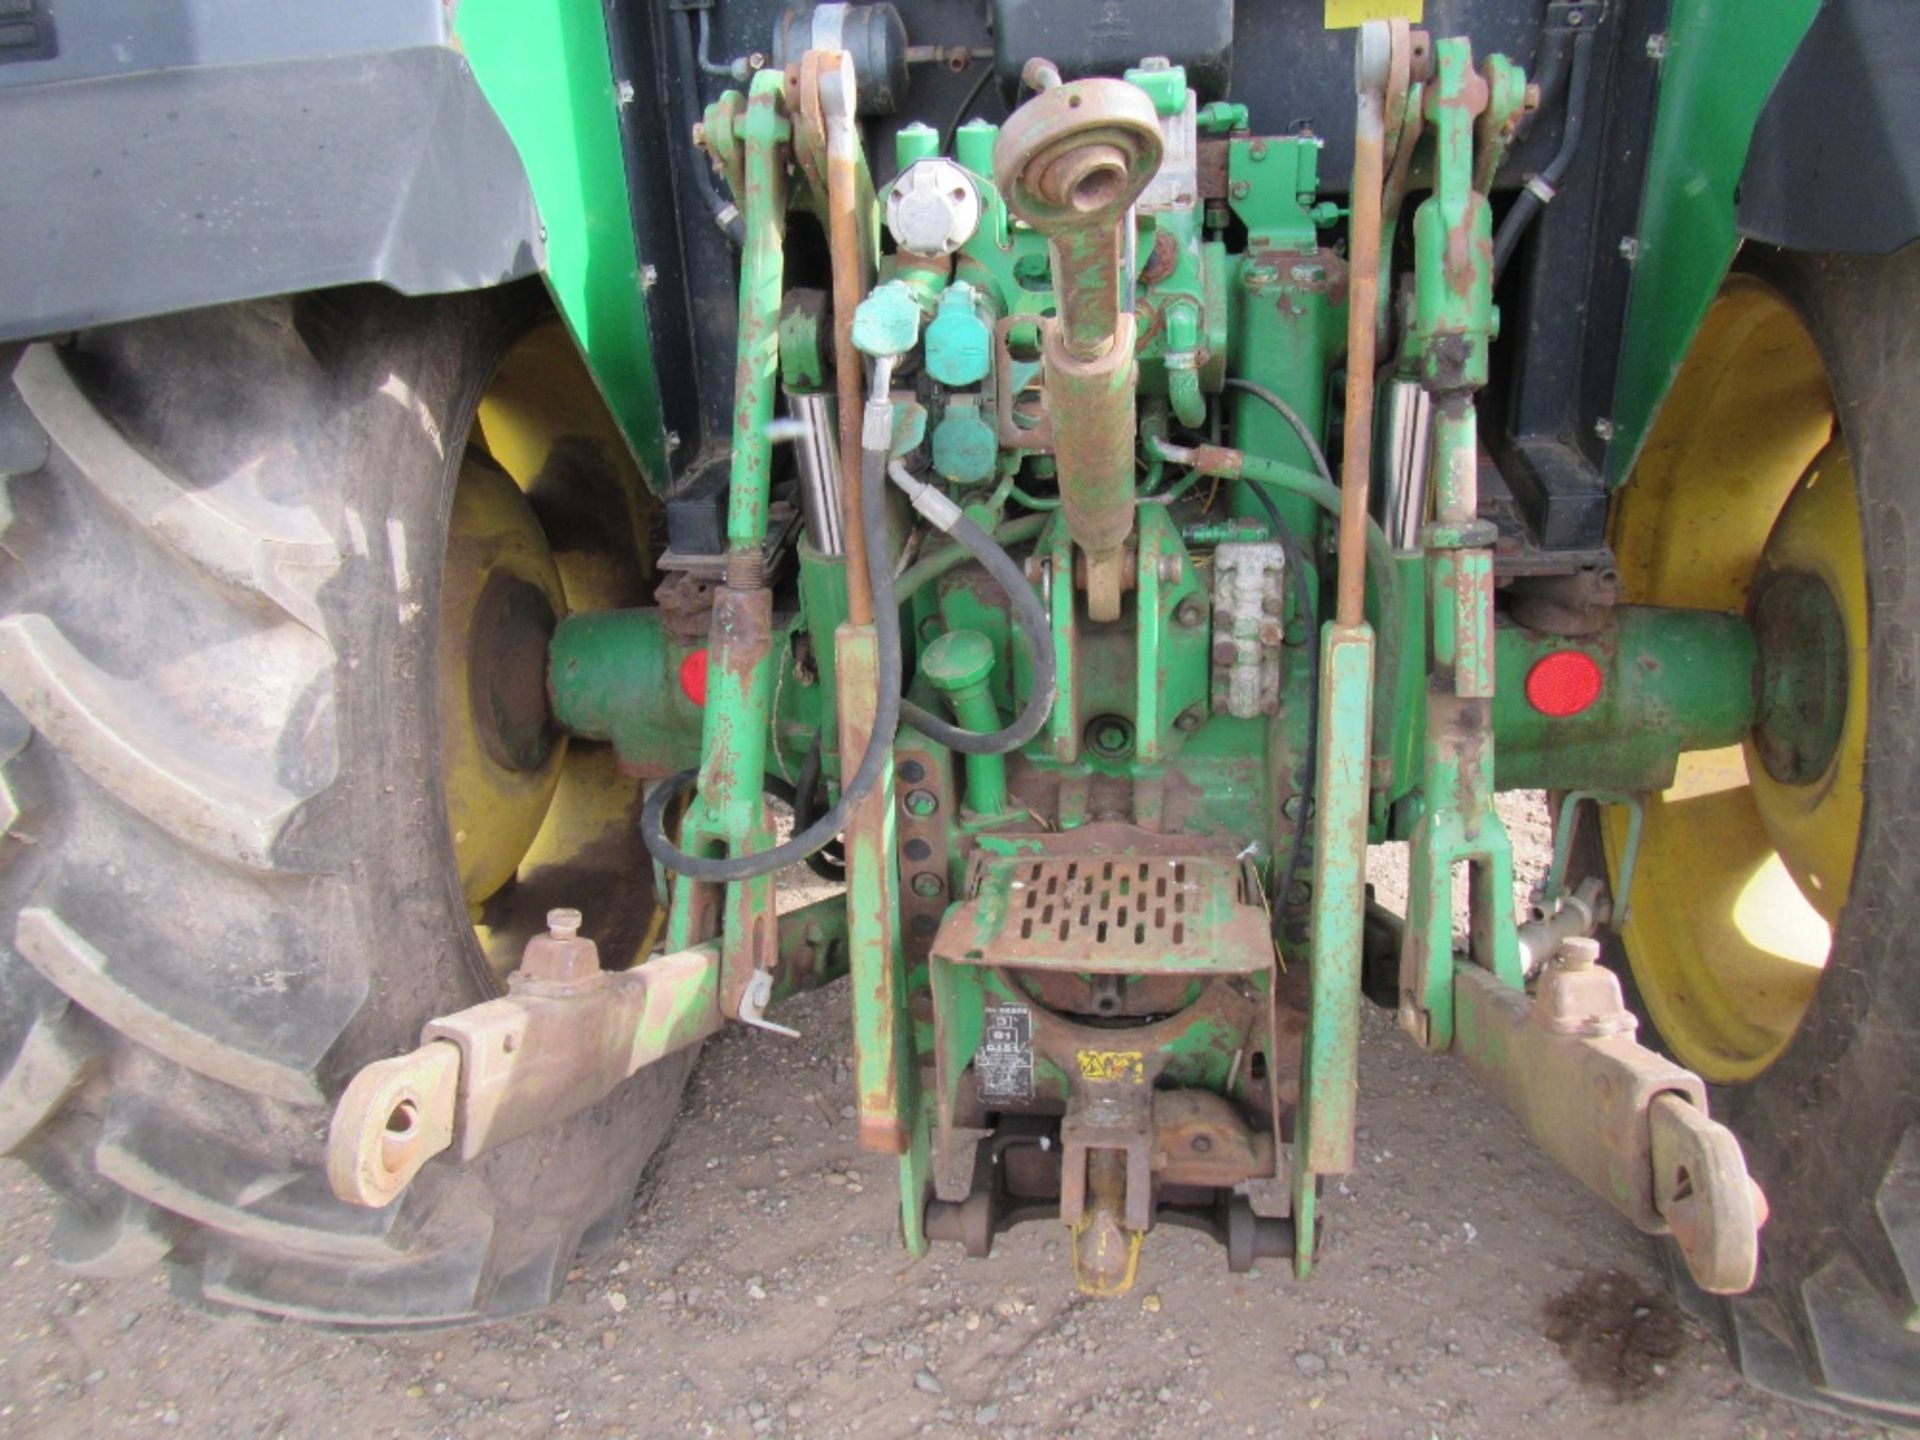 2000 John Deere 6010 4wd Tractor with Air Con & Creeper Gear. From Veg Rig. 4542 hrs. Reg No X153 - Image 7 of 17